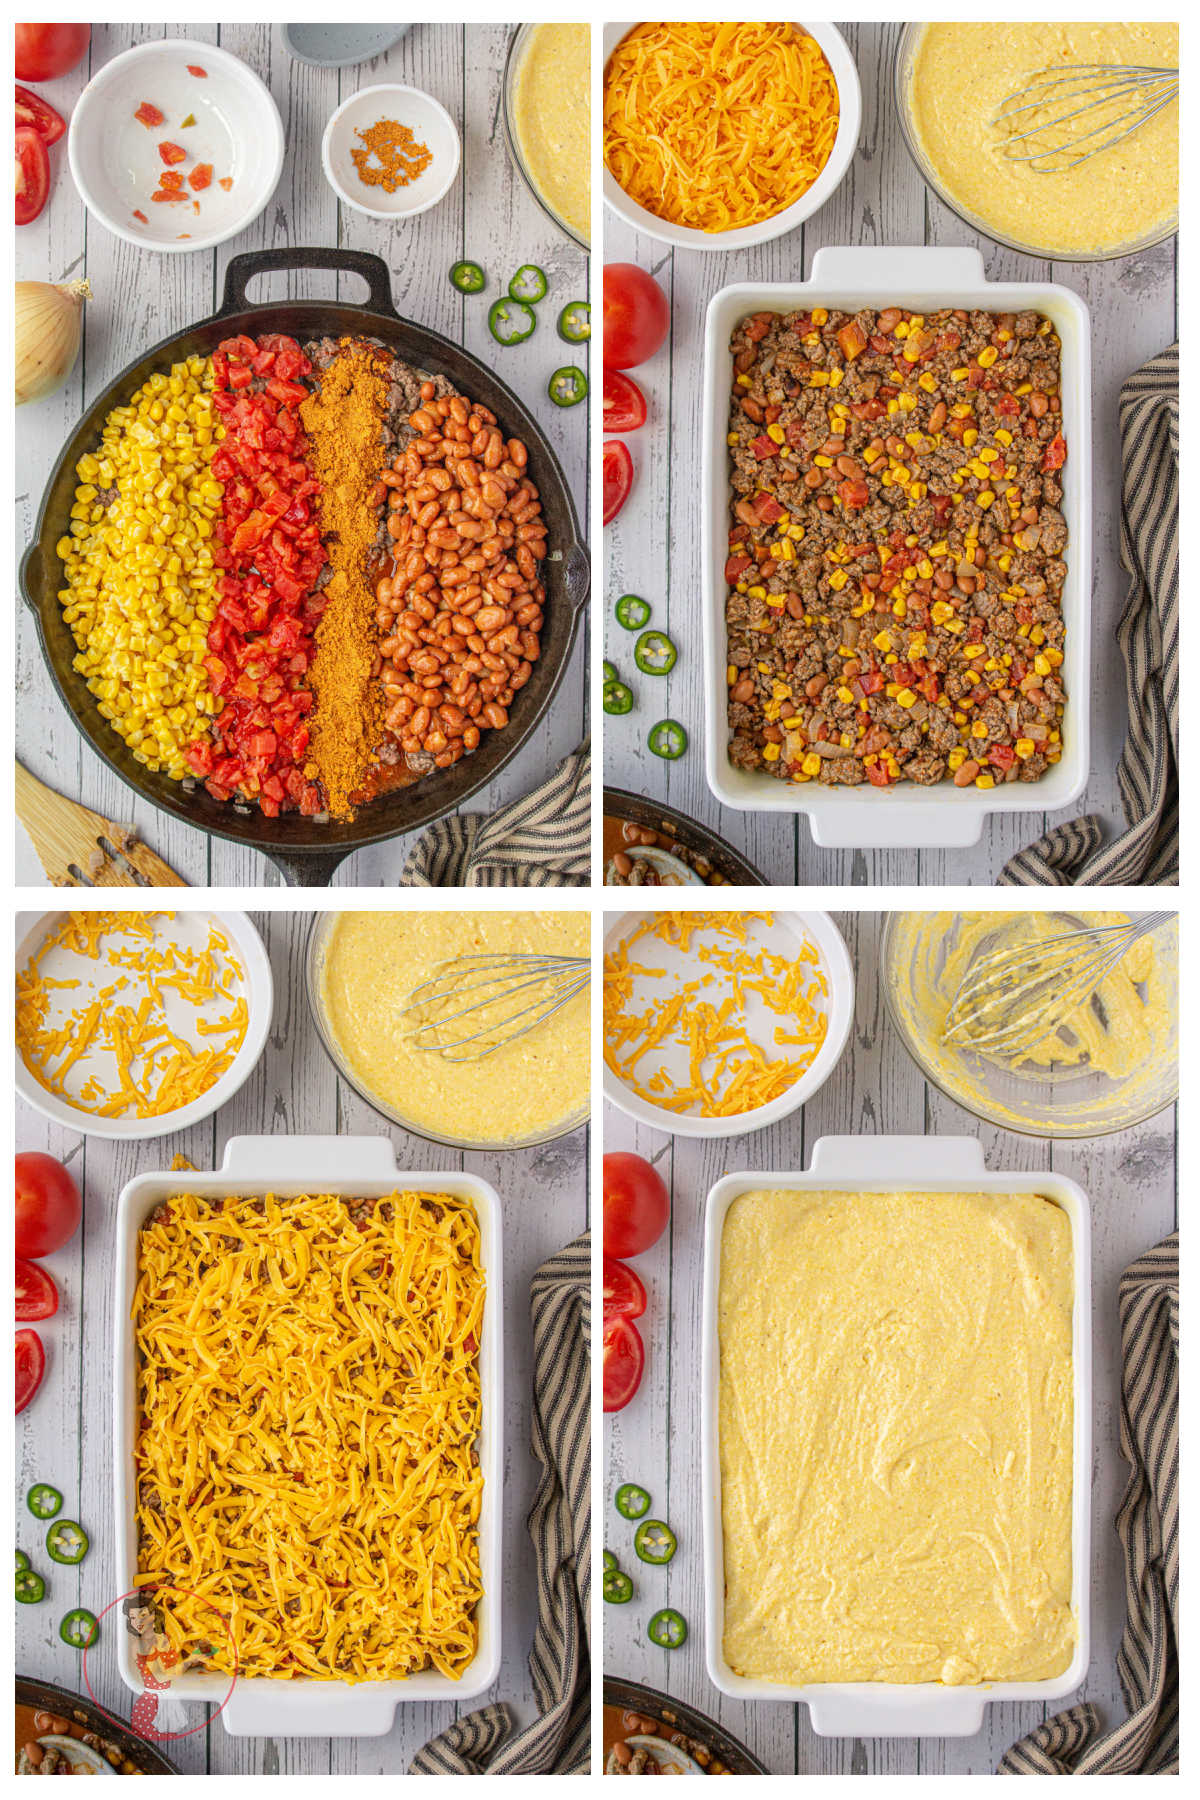 Step by step images showing how to make this cowboy cornbread casserole recipe.